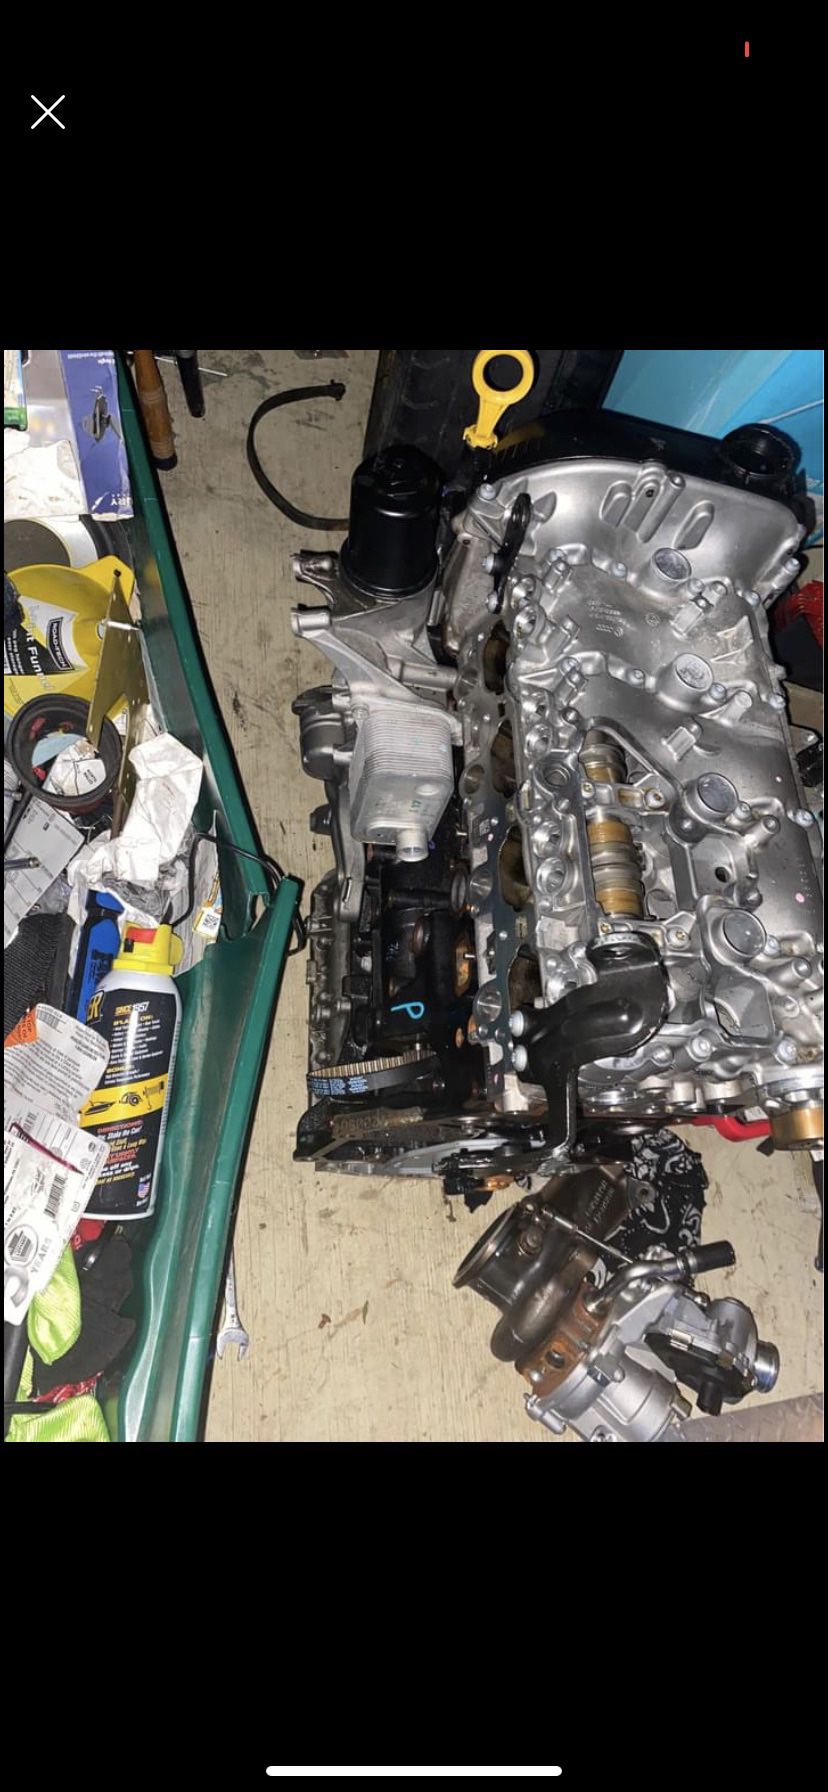 New Audi Engine Transmission And Many Other Parts 800 For Everything